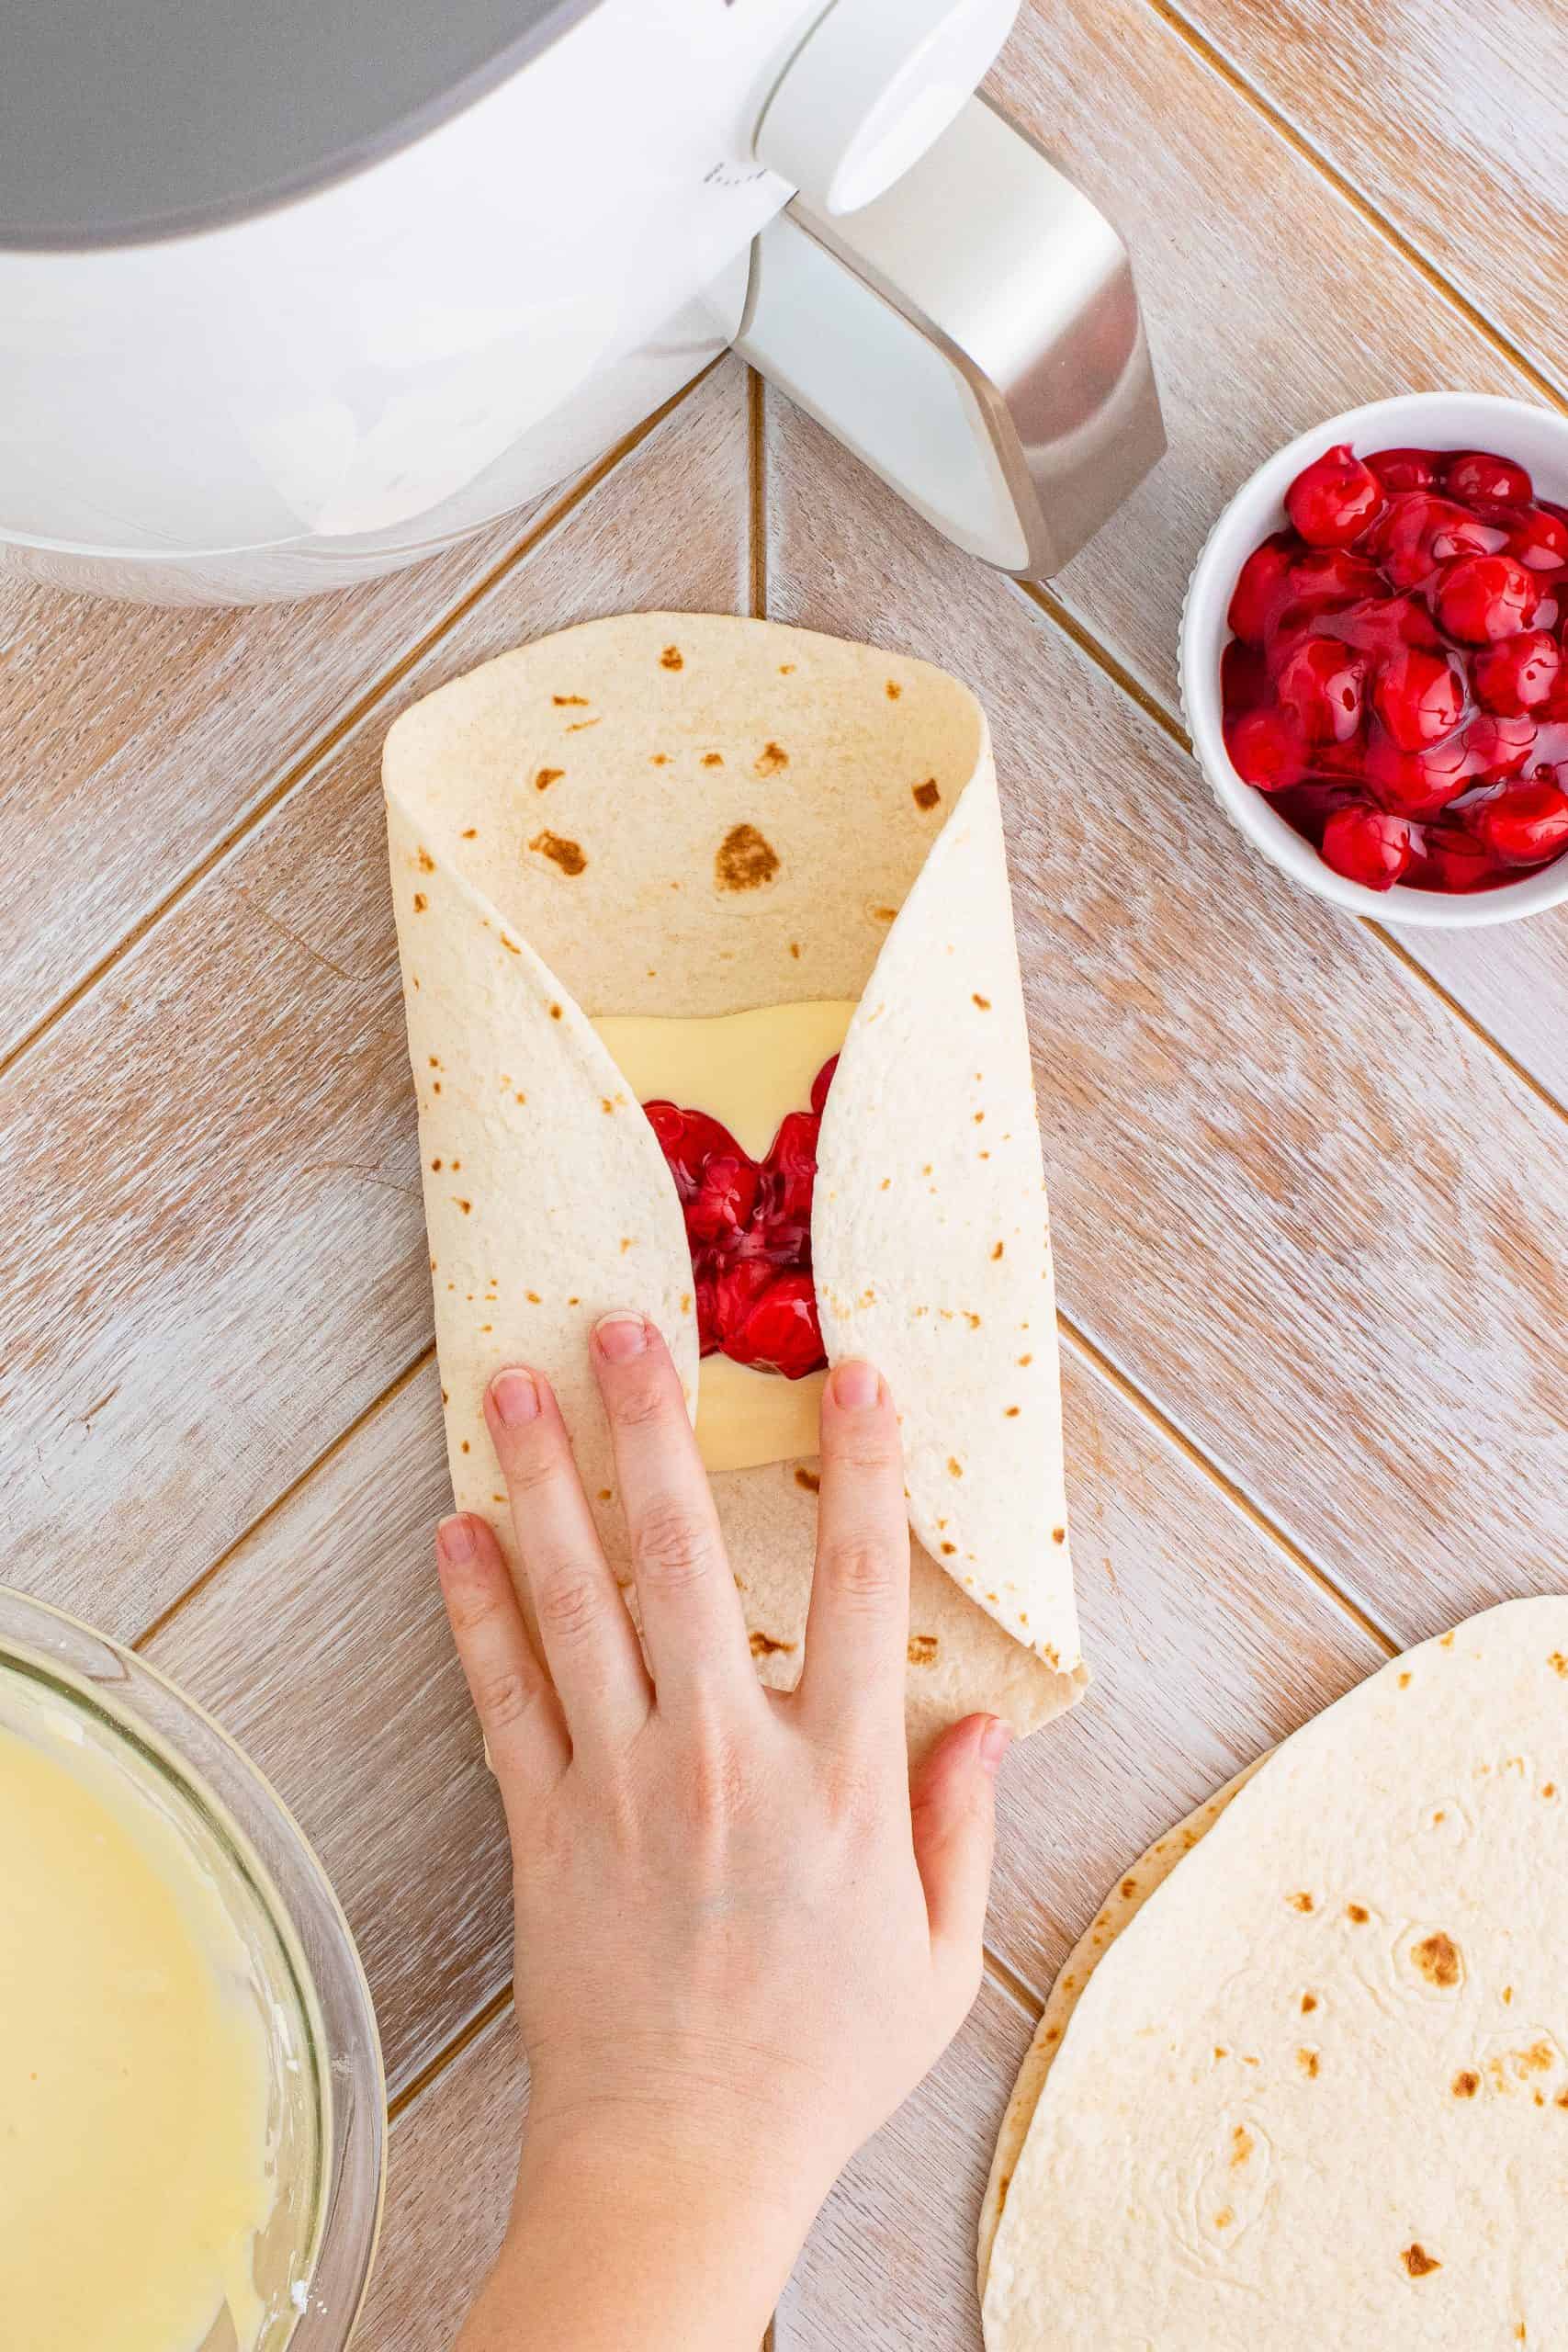 Hand folding over two sides of of tortilla over filling.